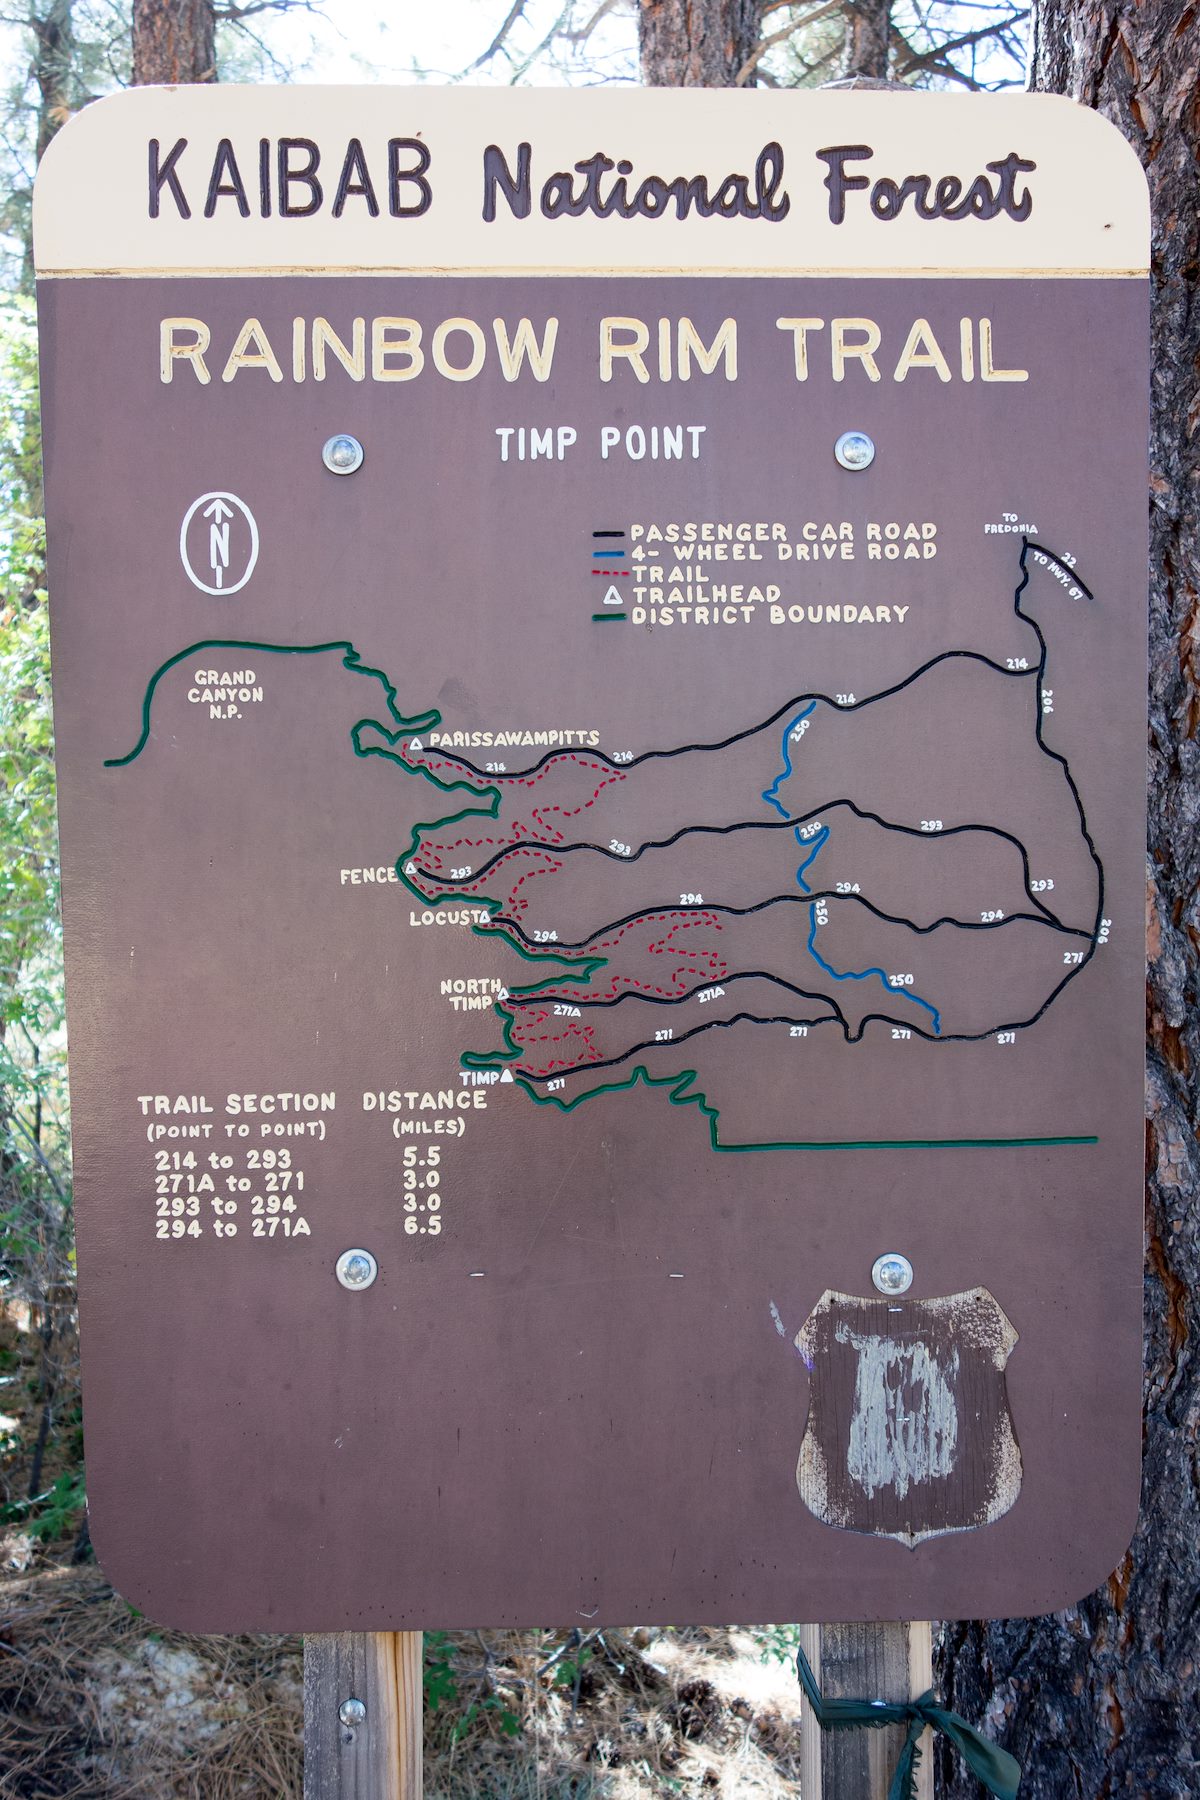 2014 October Rainbow Rim Trail Sign at Timp Point